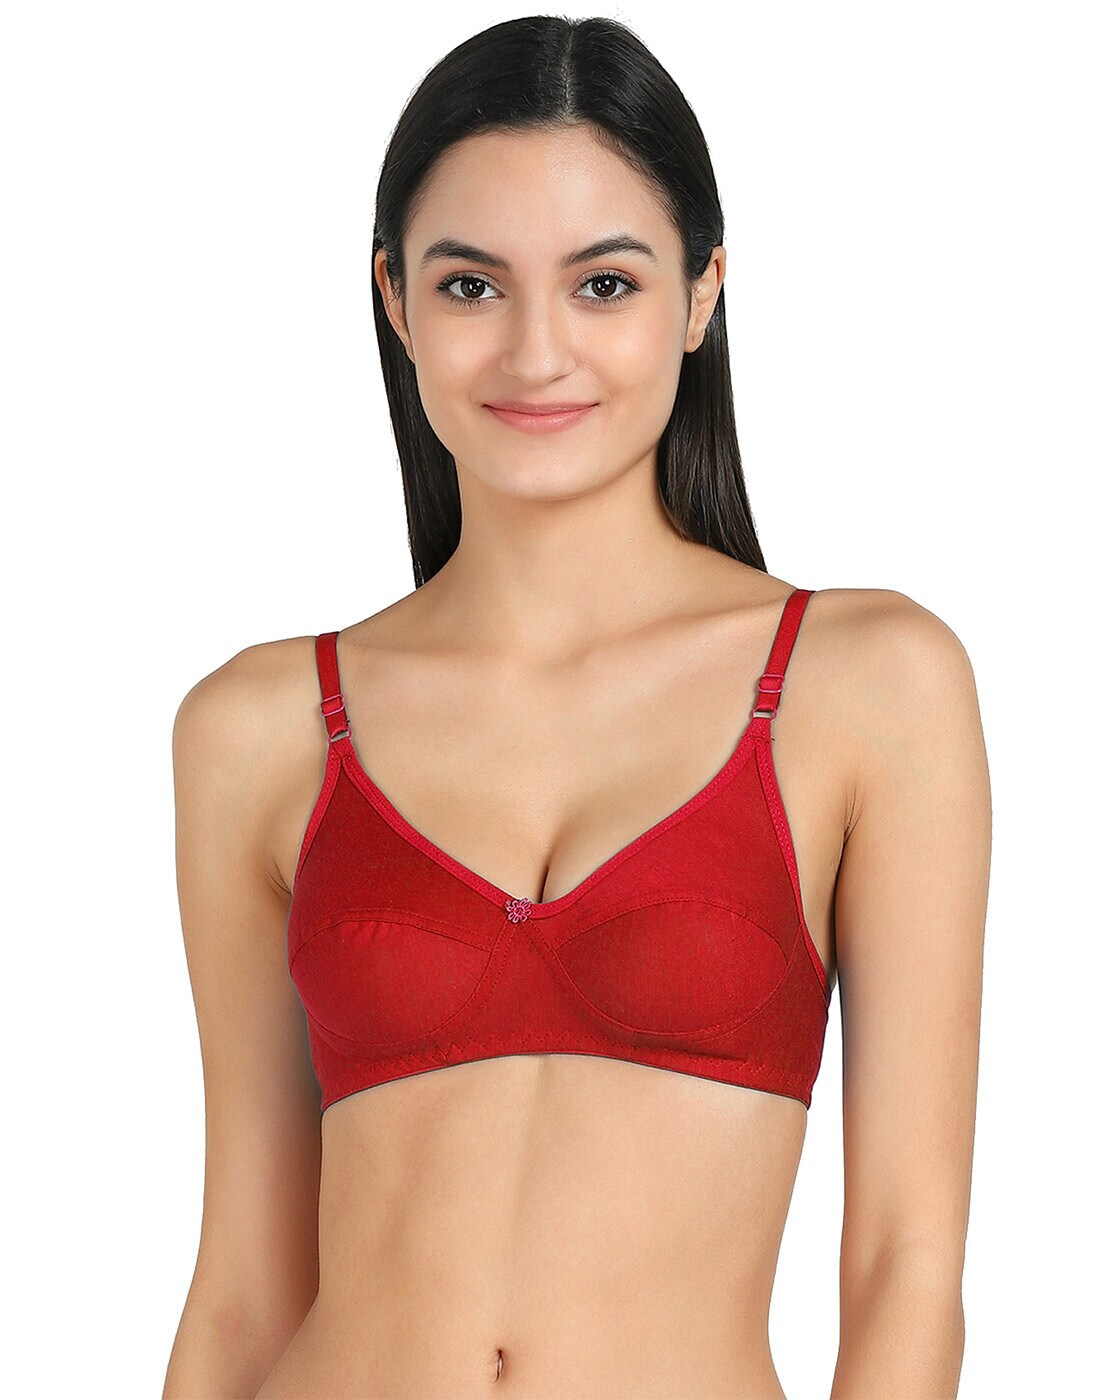 Buy India Bazar ROOPSI Non Wired Bra by INDIABAZAAR Size 28 C Cup